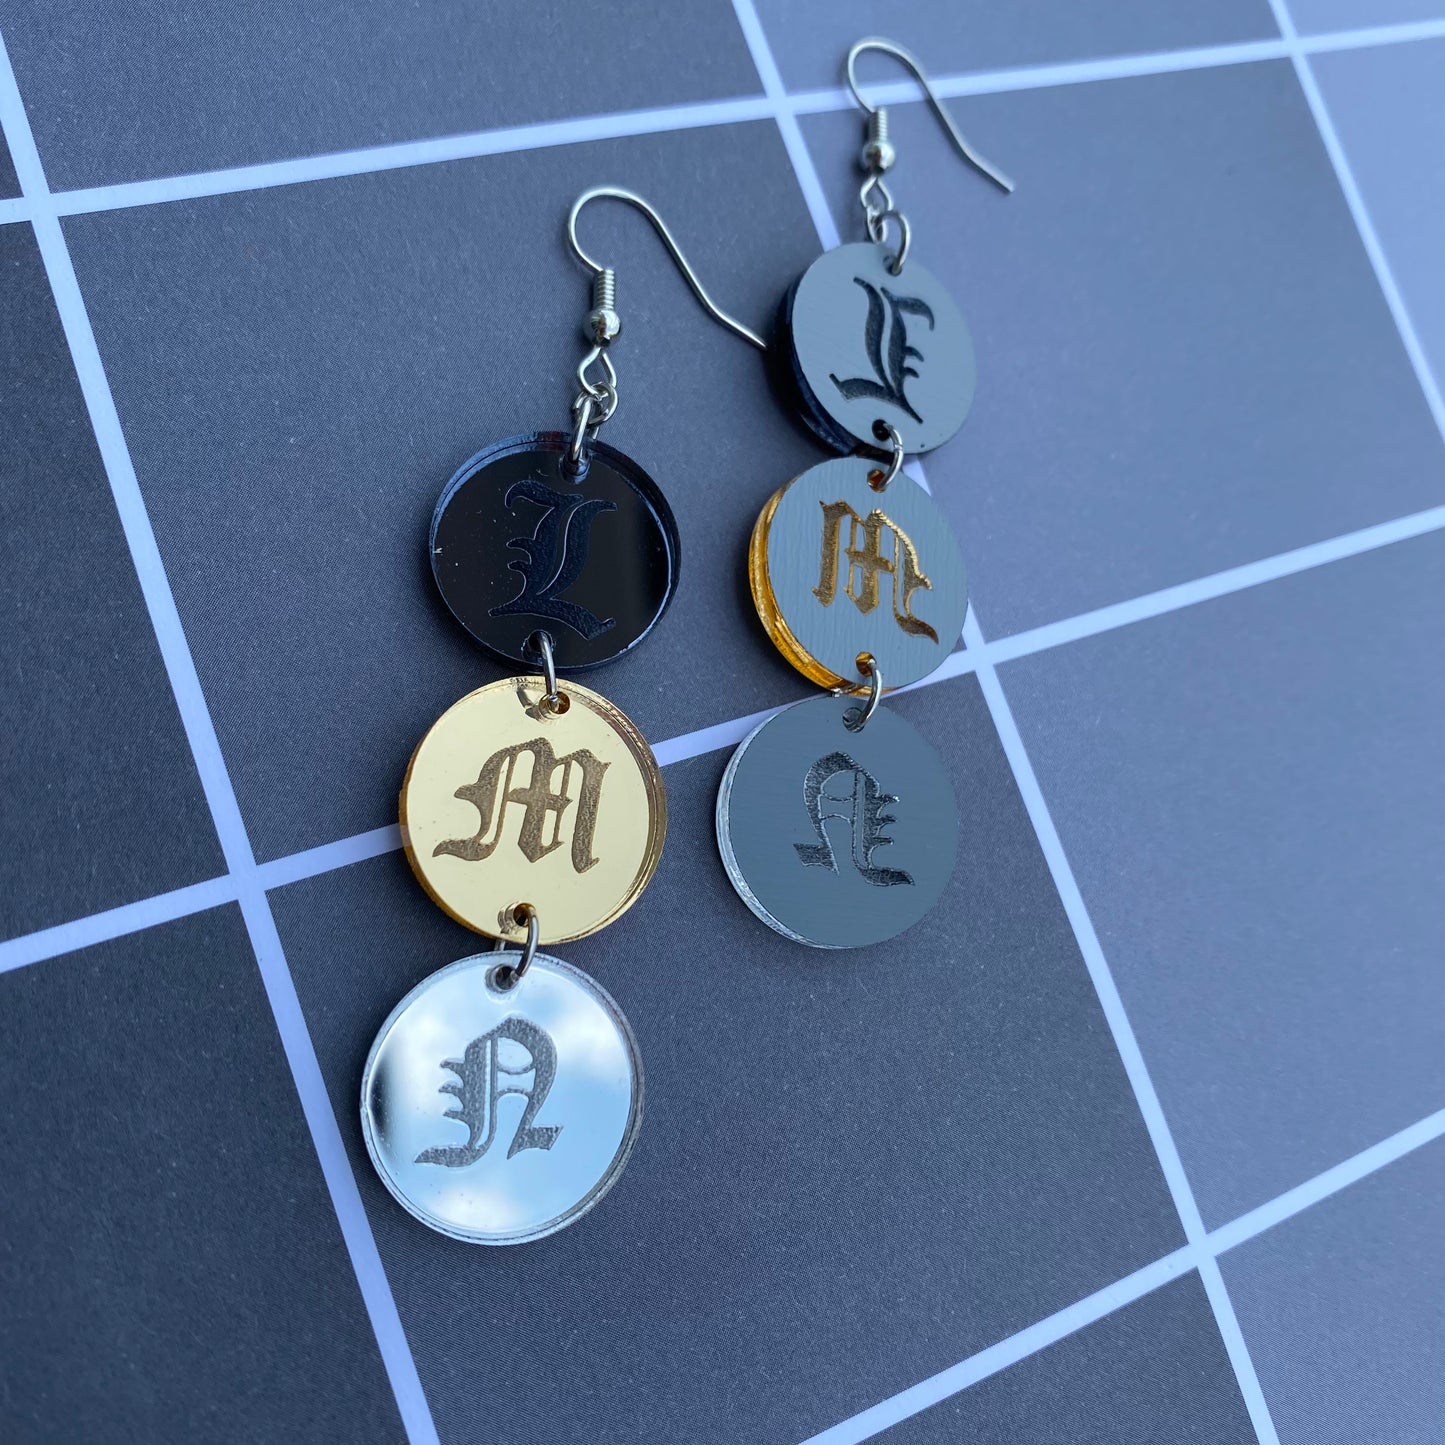 Chain of Letters L, M, N Mirrored Acrylic Earrings